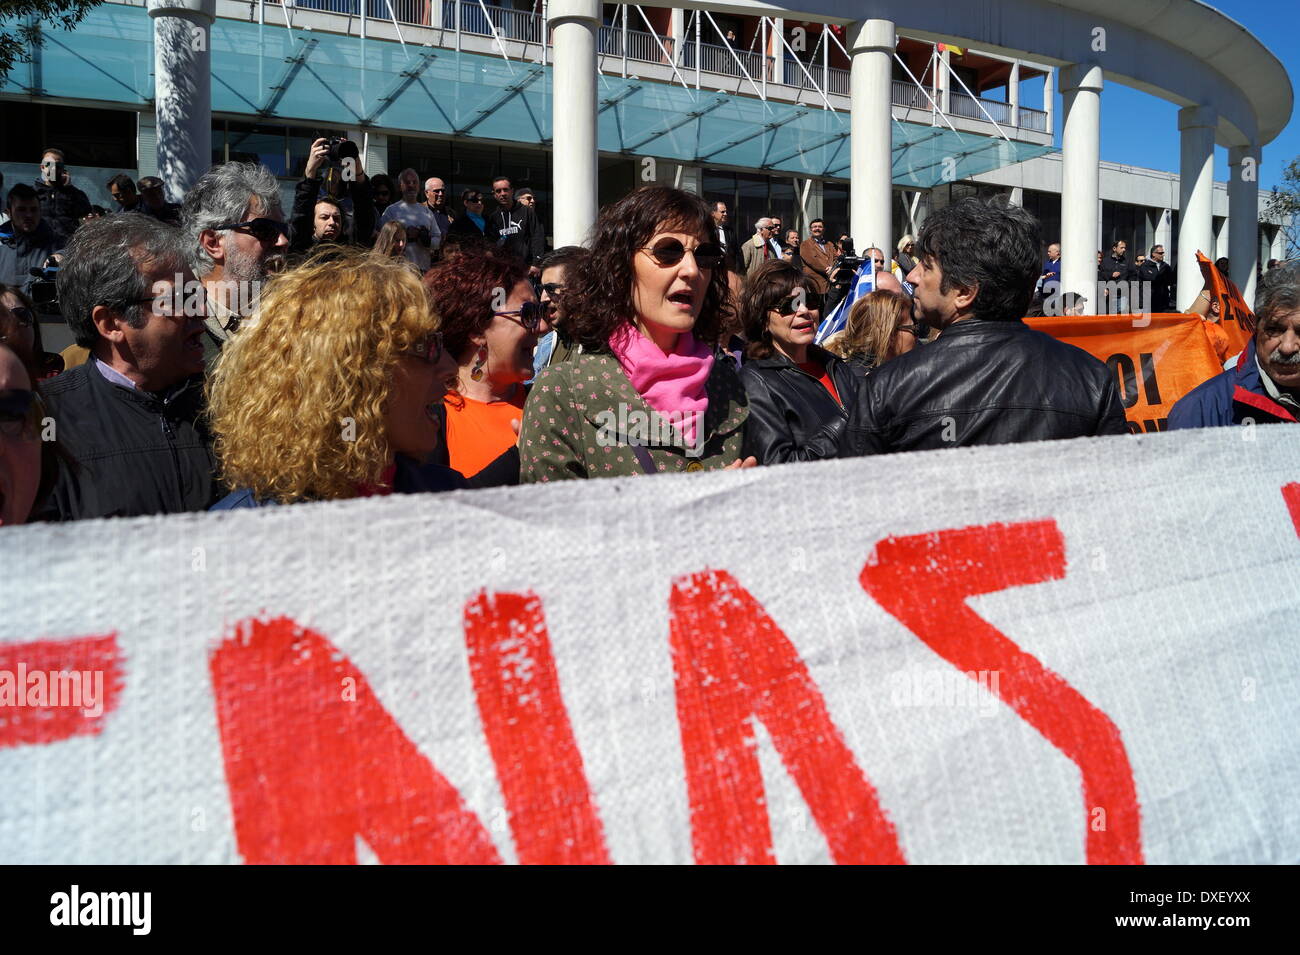 Thessaloniki, Greece. 25th March 2014. Schoolteachers chant anti-austerity slogans during the Greek independence day parade on Tuesday, in the northern port city of Thessaloniki, Greece's second largest city. Greeks celebrated their national independence day amid tight security and protest in the northern port city of Thessaloniki, as school teachers staged a protest against planned layoffs as part of governments cost cutting reforms.  Credit:  Orhan Tsolak/Alamy Live News Stock Photo